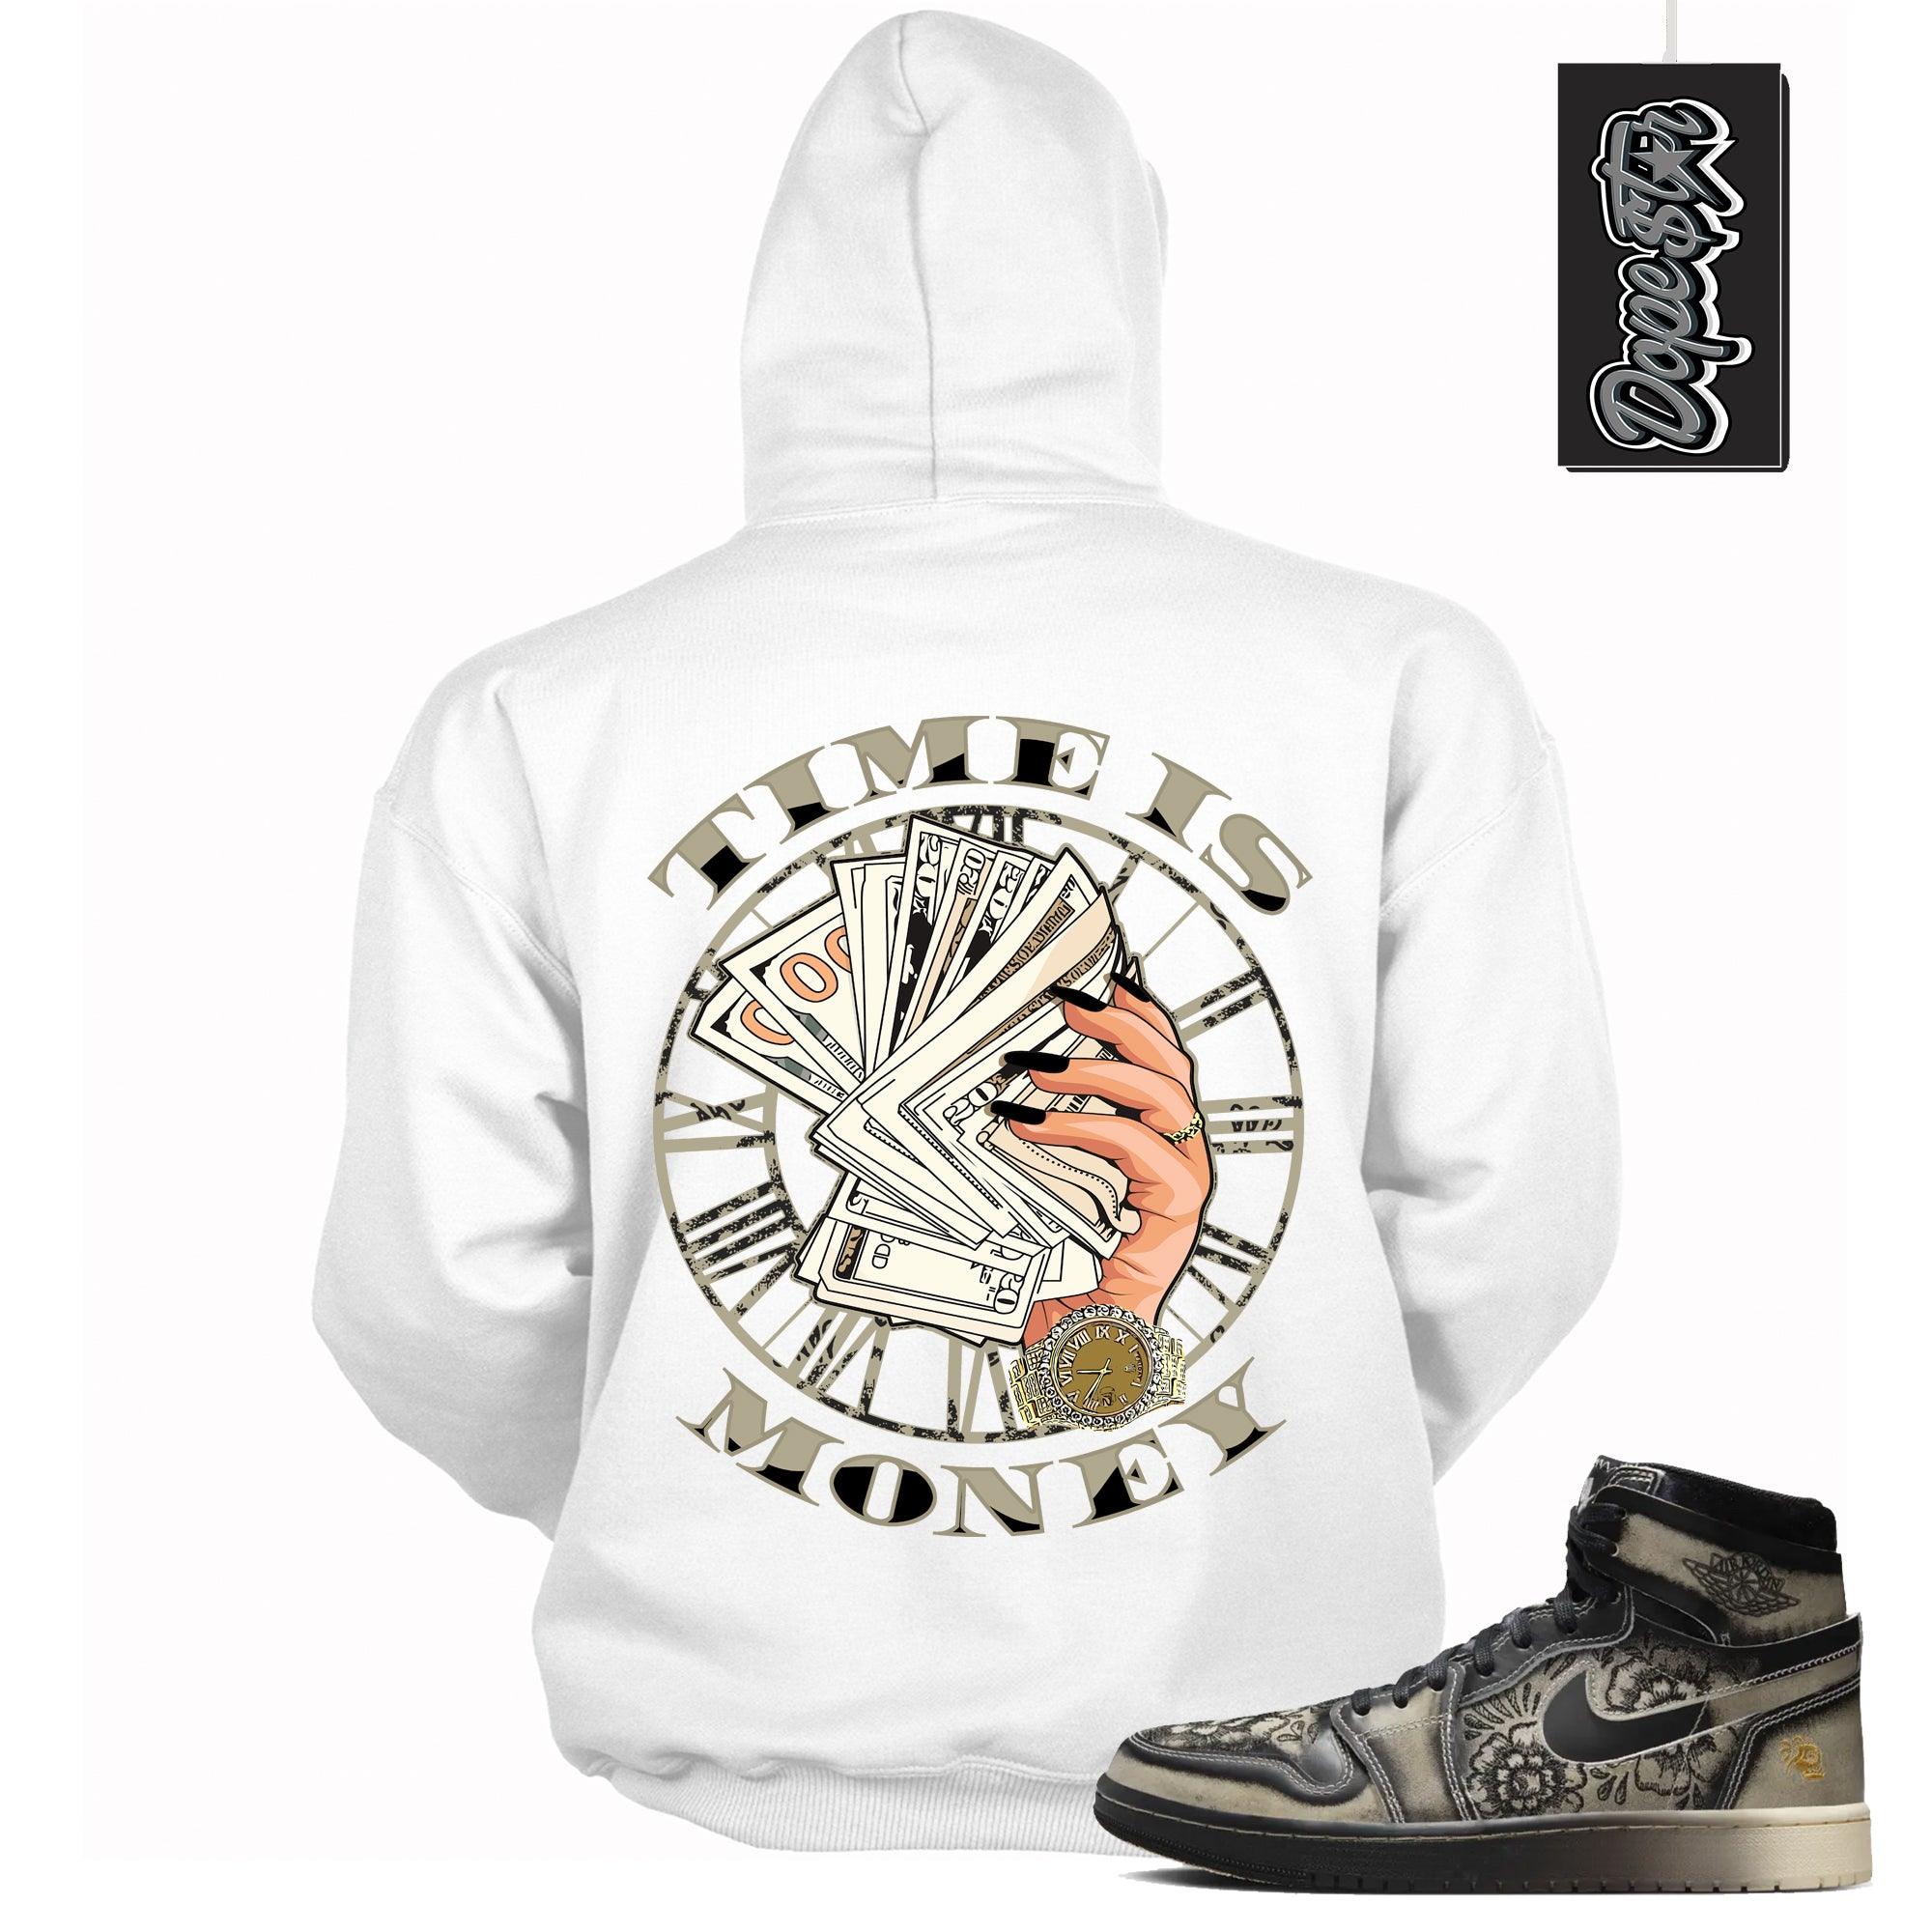 Cool White Graphic Hoodie with “ TIME IS MONEY “ print, that perfectly matches Air Jordan 1 High Zoom Comfort 2 Dia de Muertos Black and Pale Ivory sneakers